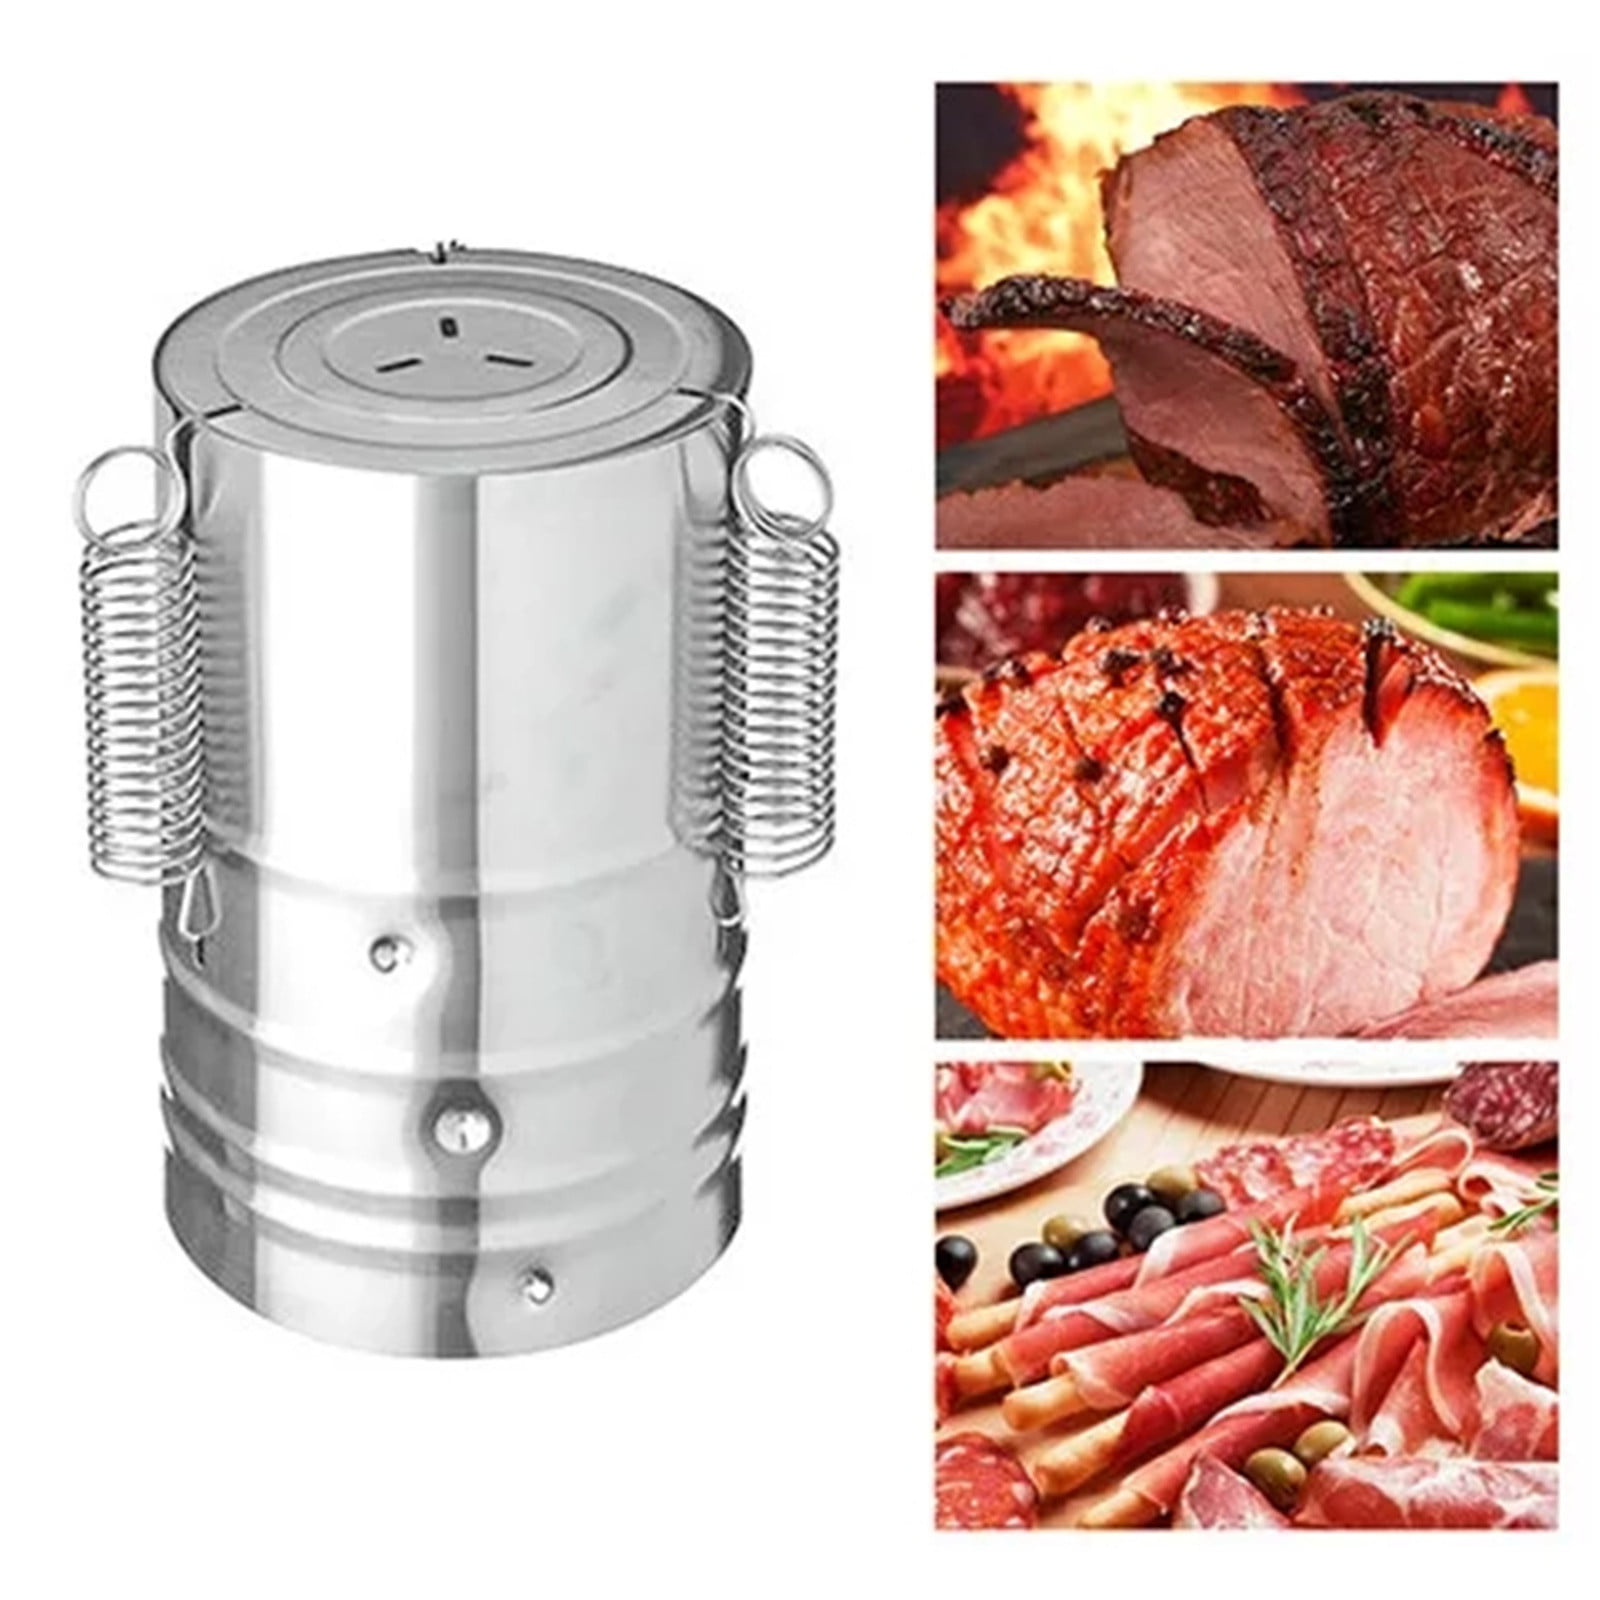 Ham Press Maker Stainless Steel Round Shape Meat Press Maker Machine for  Making Sandwich Seafood Patty Gourmet Cooking Tools